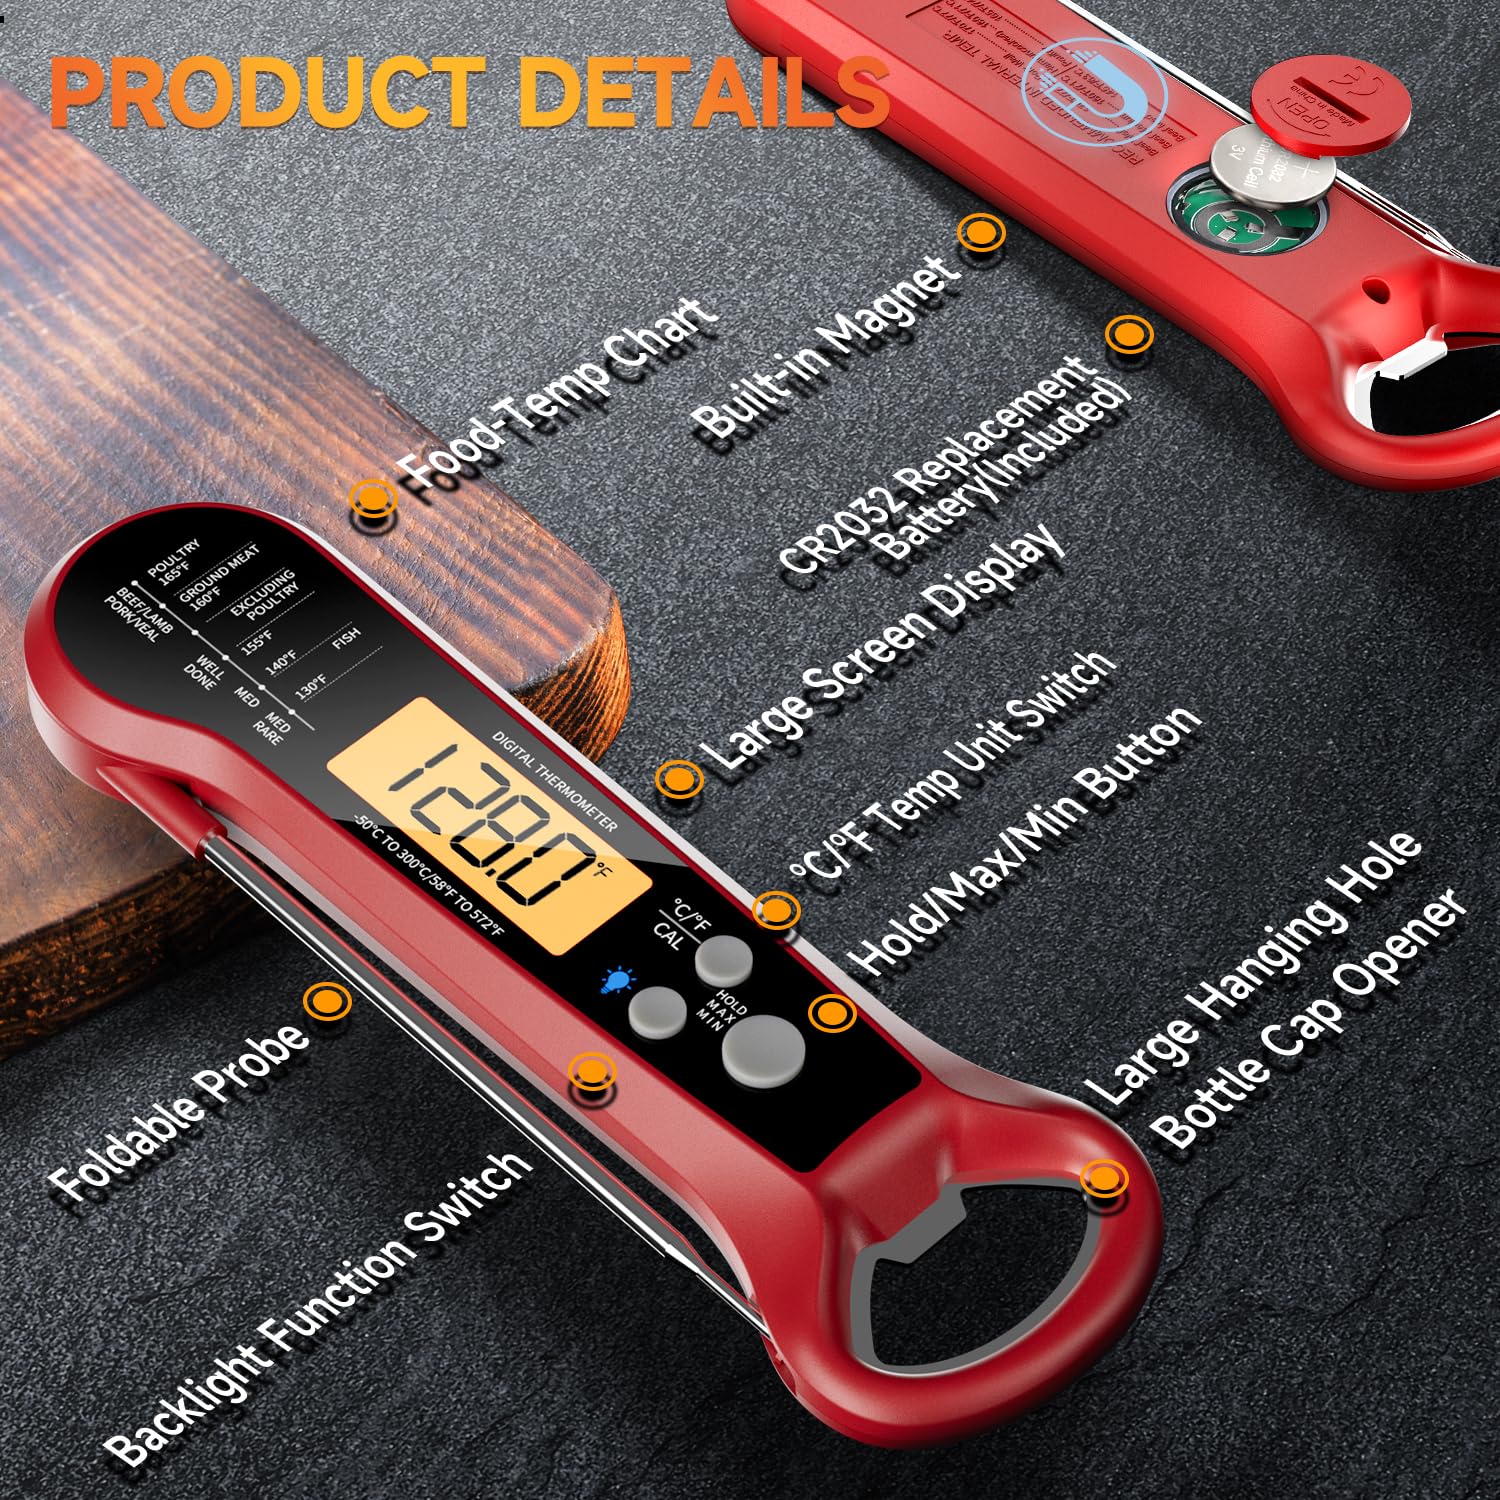 Meat Thermometer Digital, Waterproof Instant Read Meat Thermometers for Grilling and Cooking. Food Thermometer, Kitchen Gadgets, Accessories with Bottle Cap Opener for Kitchen, BBQ, Grill…